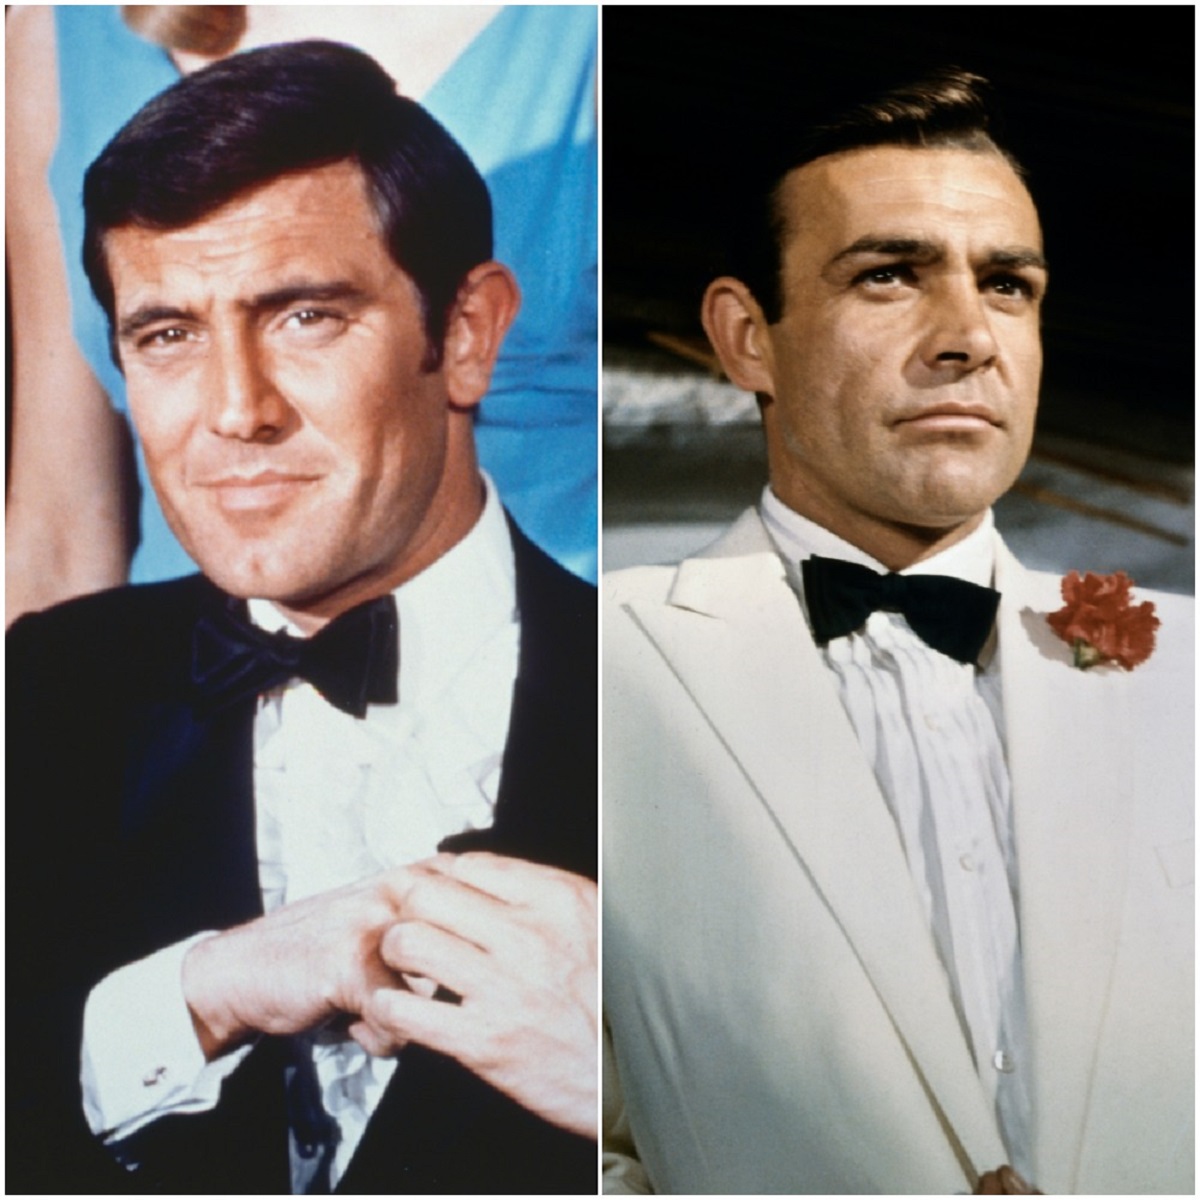 Why Sean Connery Called Fellow James Bond Actor George Lazenby ‘A Prize S***’ and Said He Couldn’t Get the Character Right